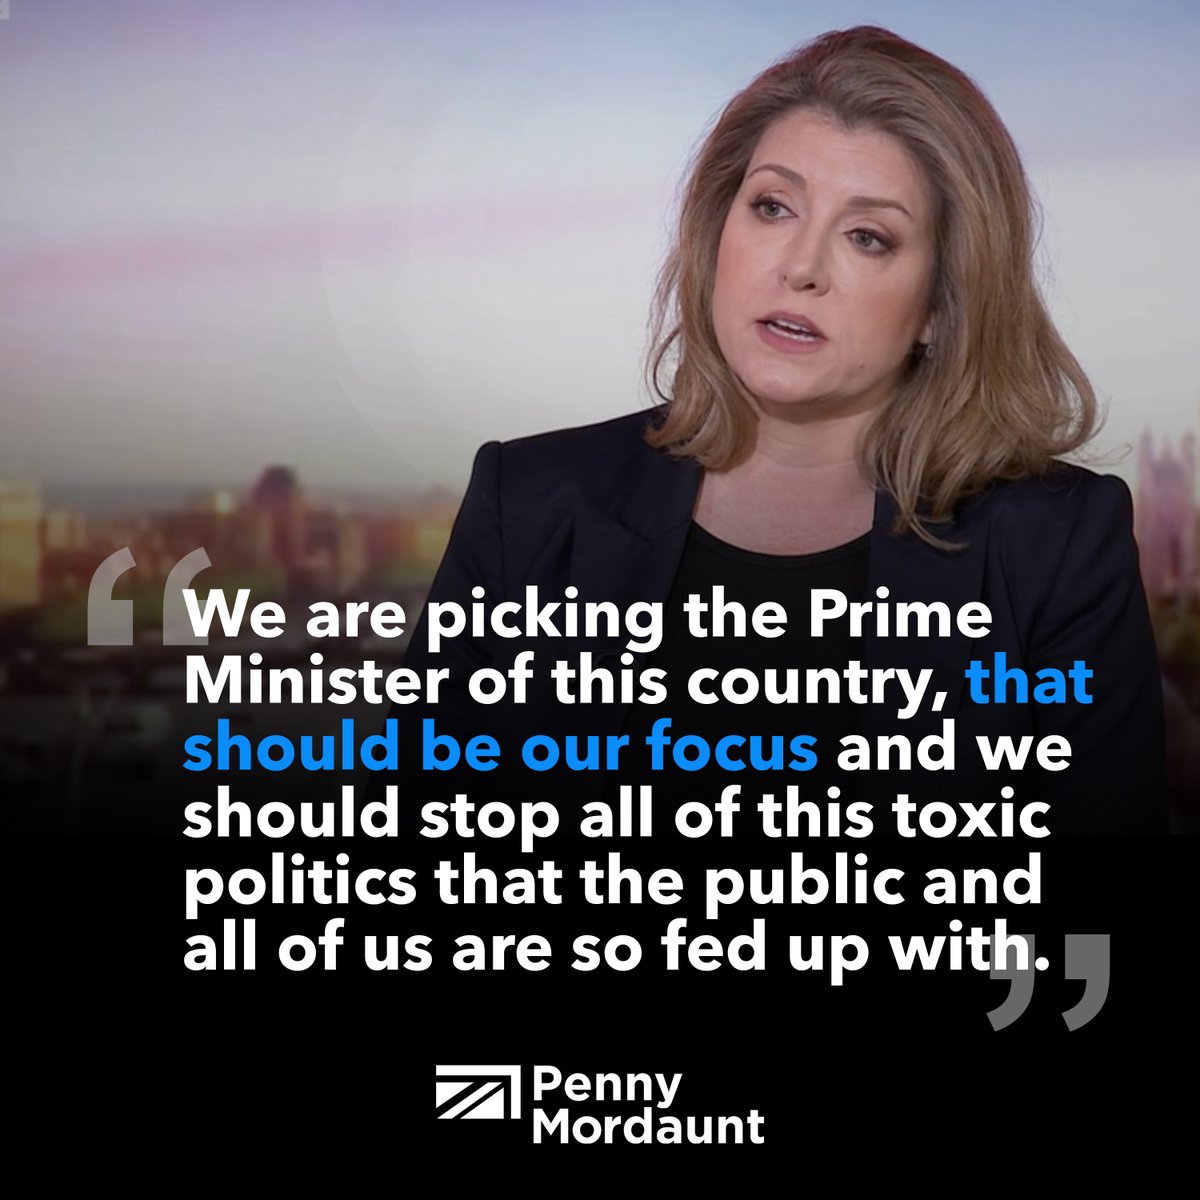 'We are picking the Prime Minister of this country, that should be our focus and we should stop all of this toxic politics that the public and all of us are so fed up with'